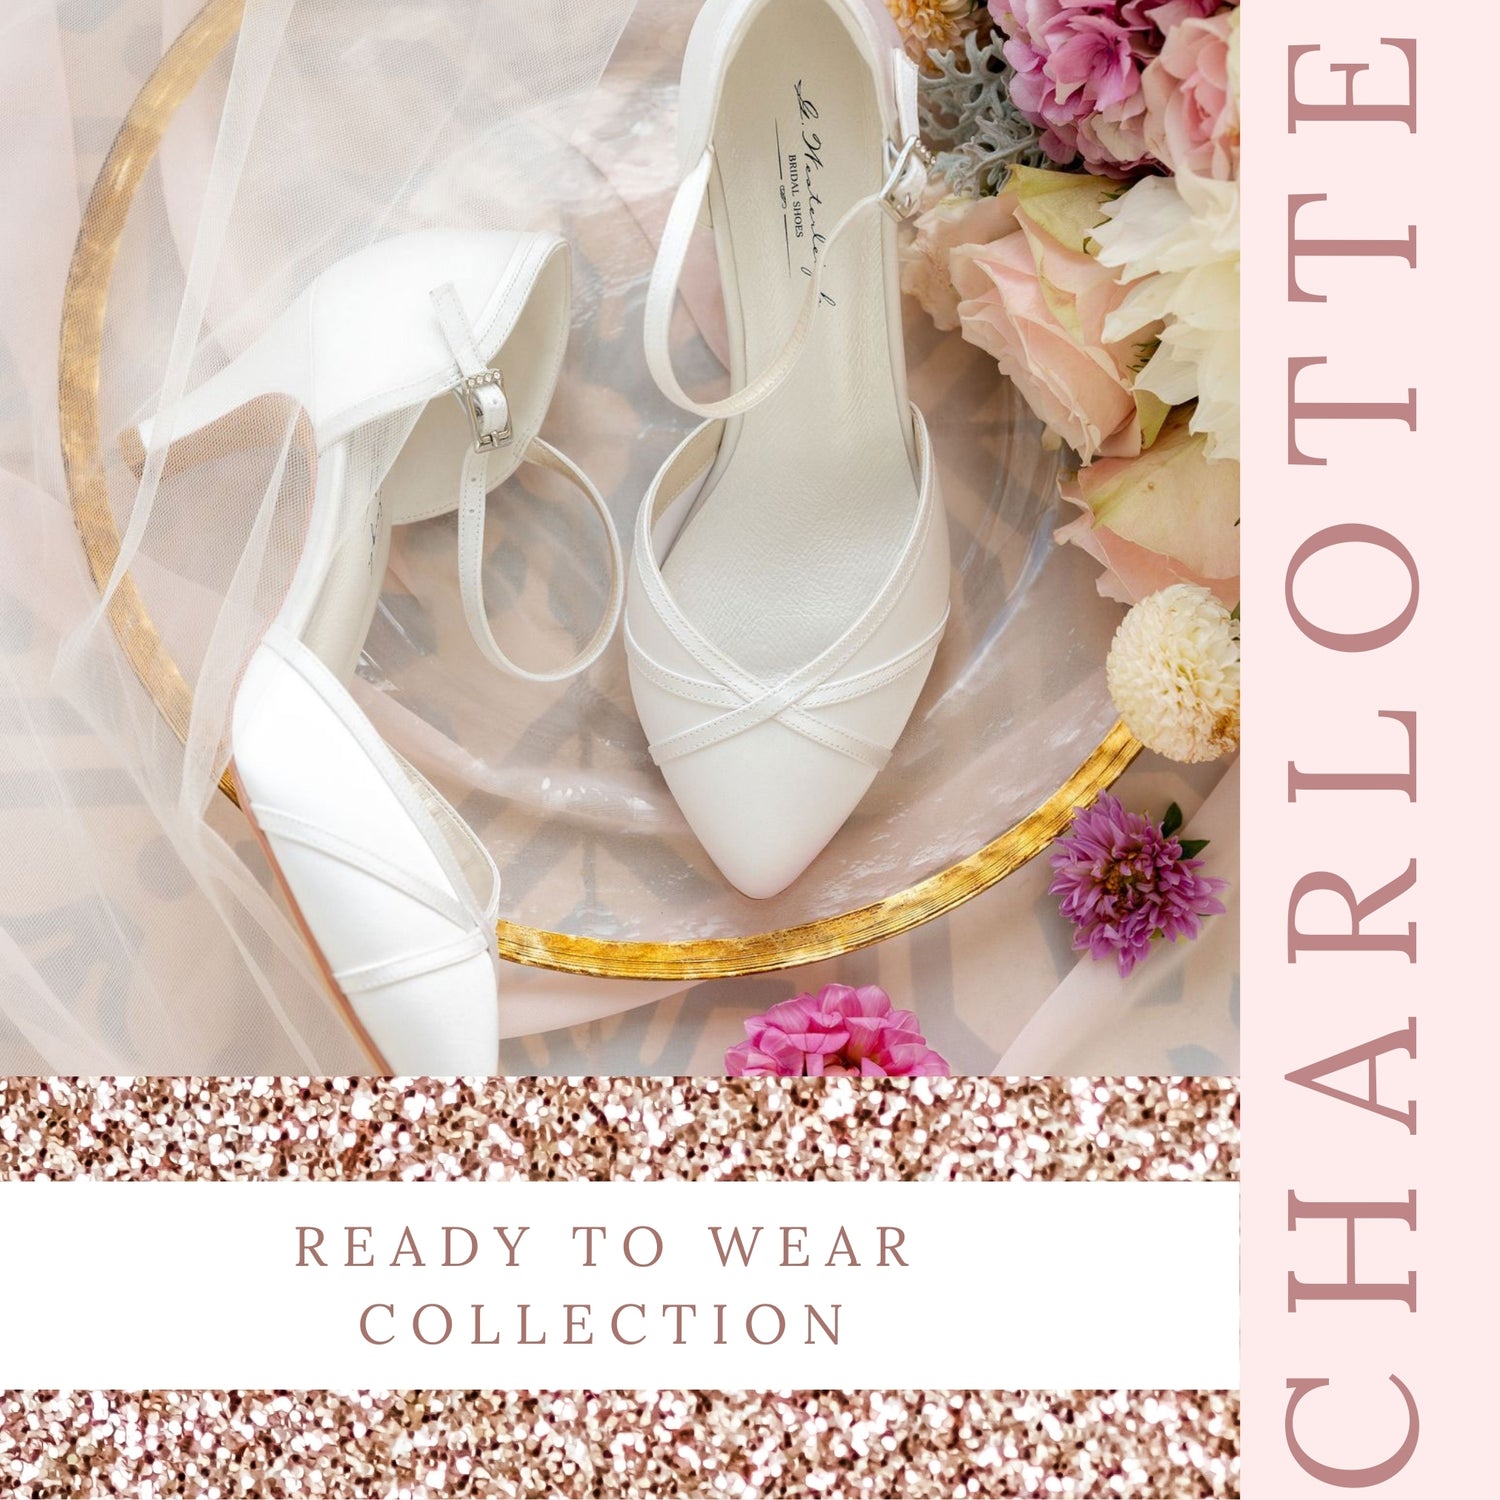 low-heels-for-wedding-ivory